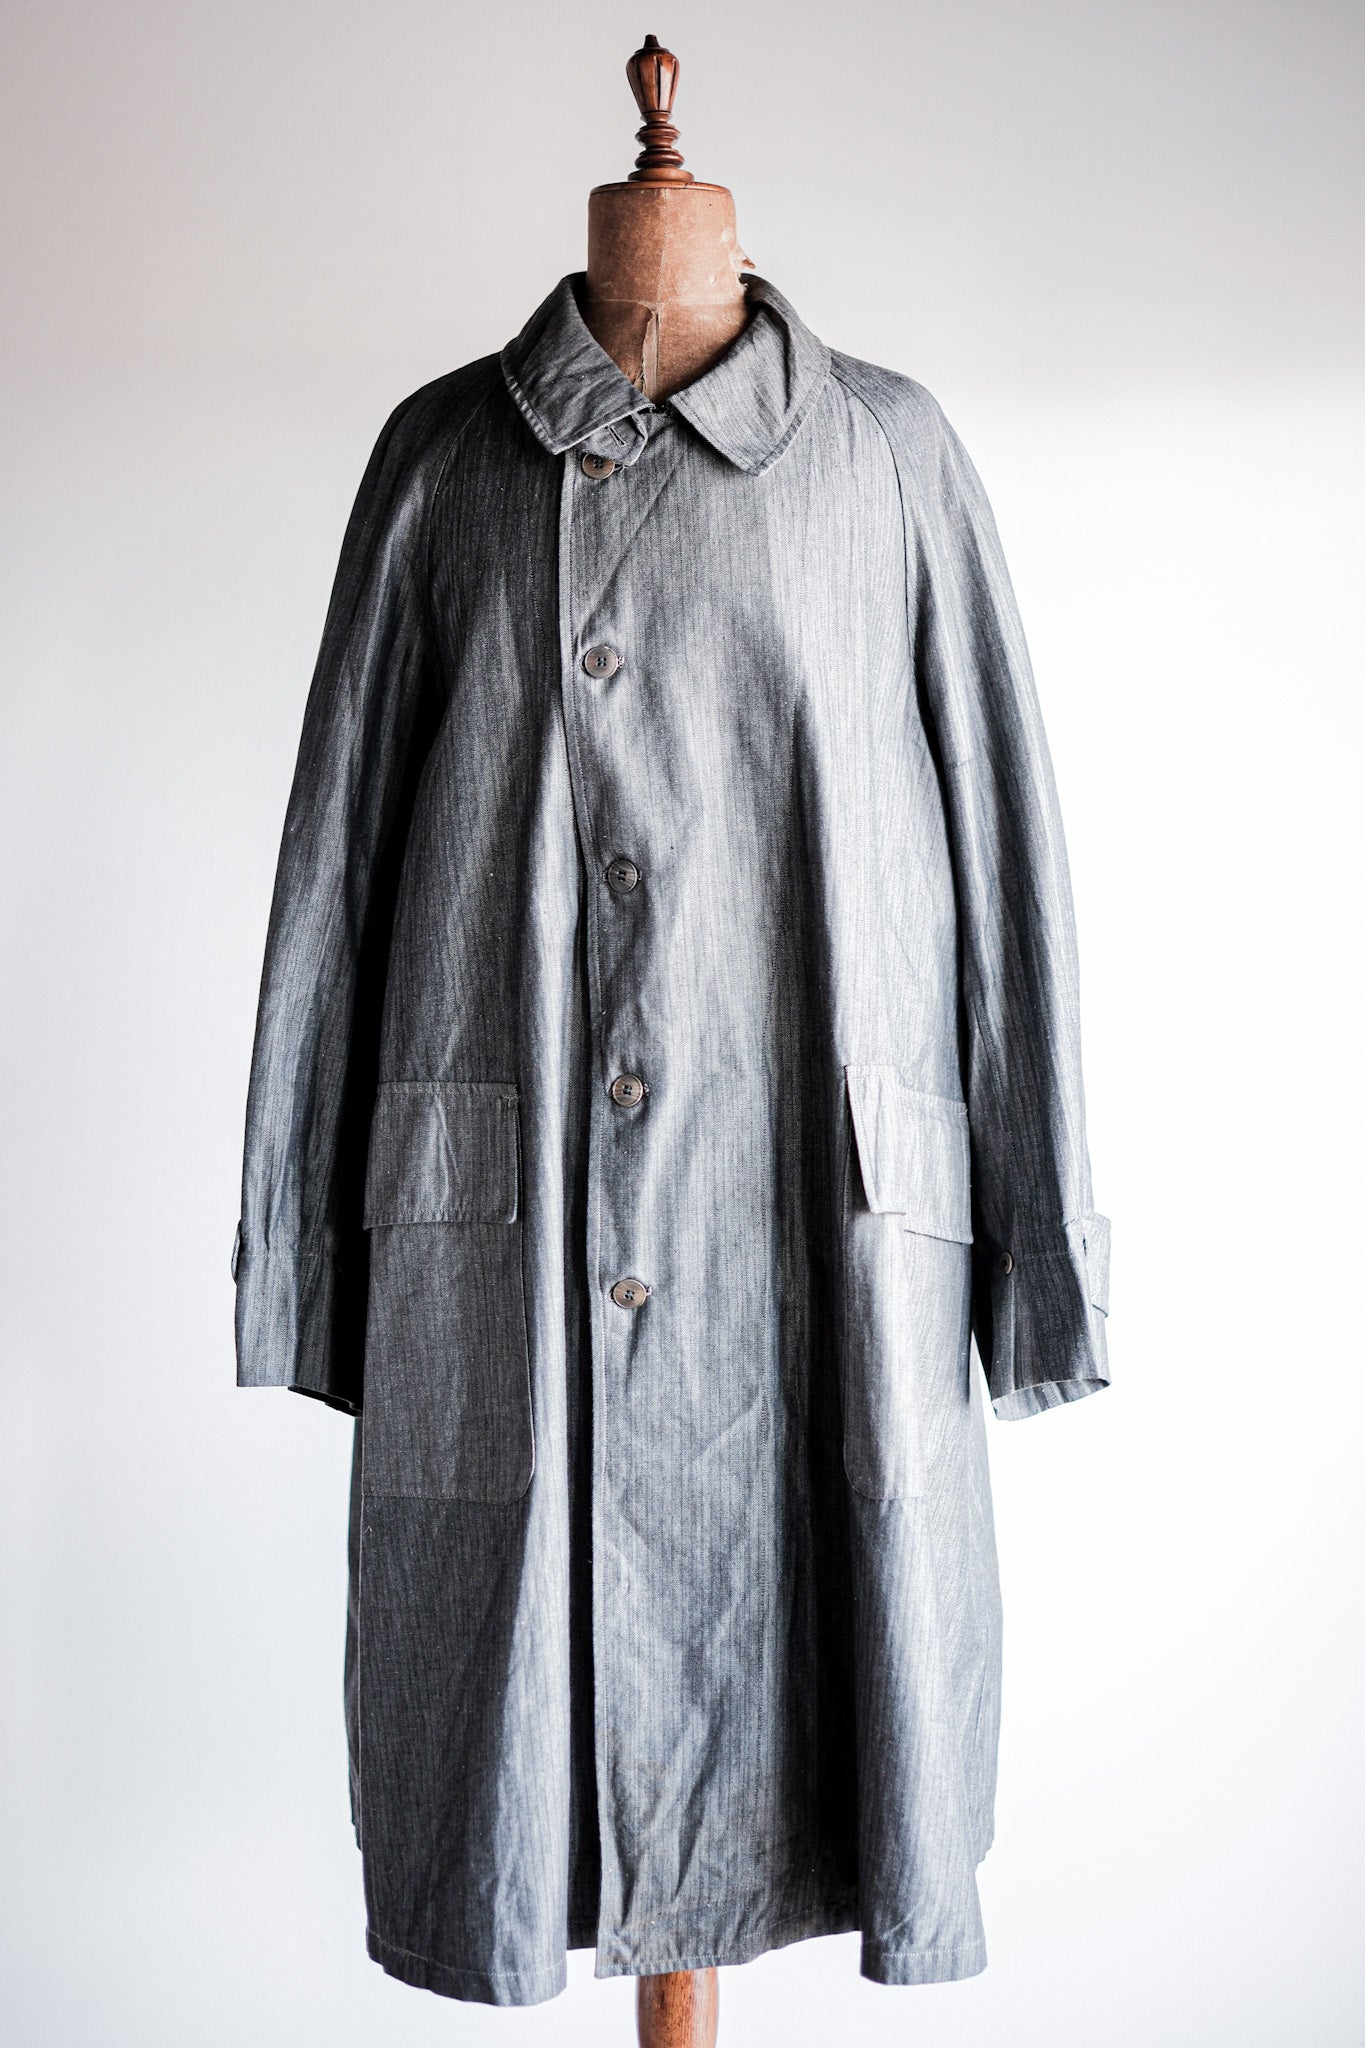 [~ 40's] French Vintage Salt & Pepper Cotton HBT WORK COAT WORK CHITH CHIN STRAP "DEAD STOCK"